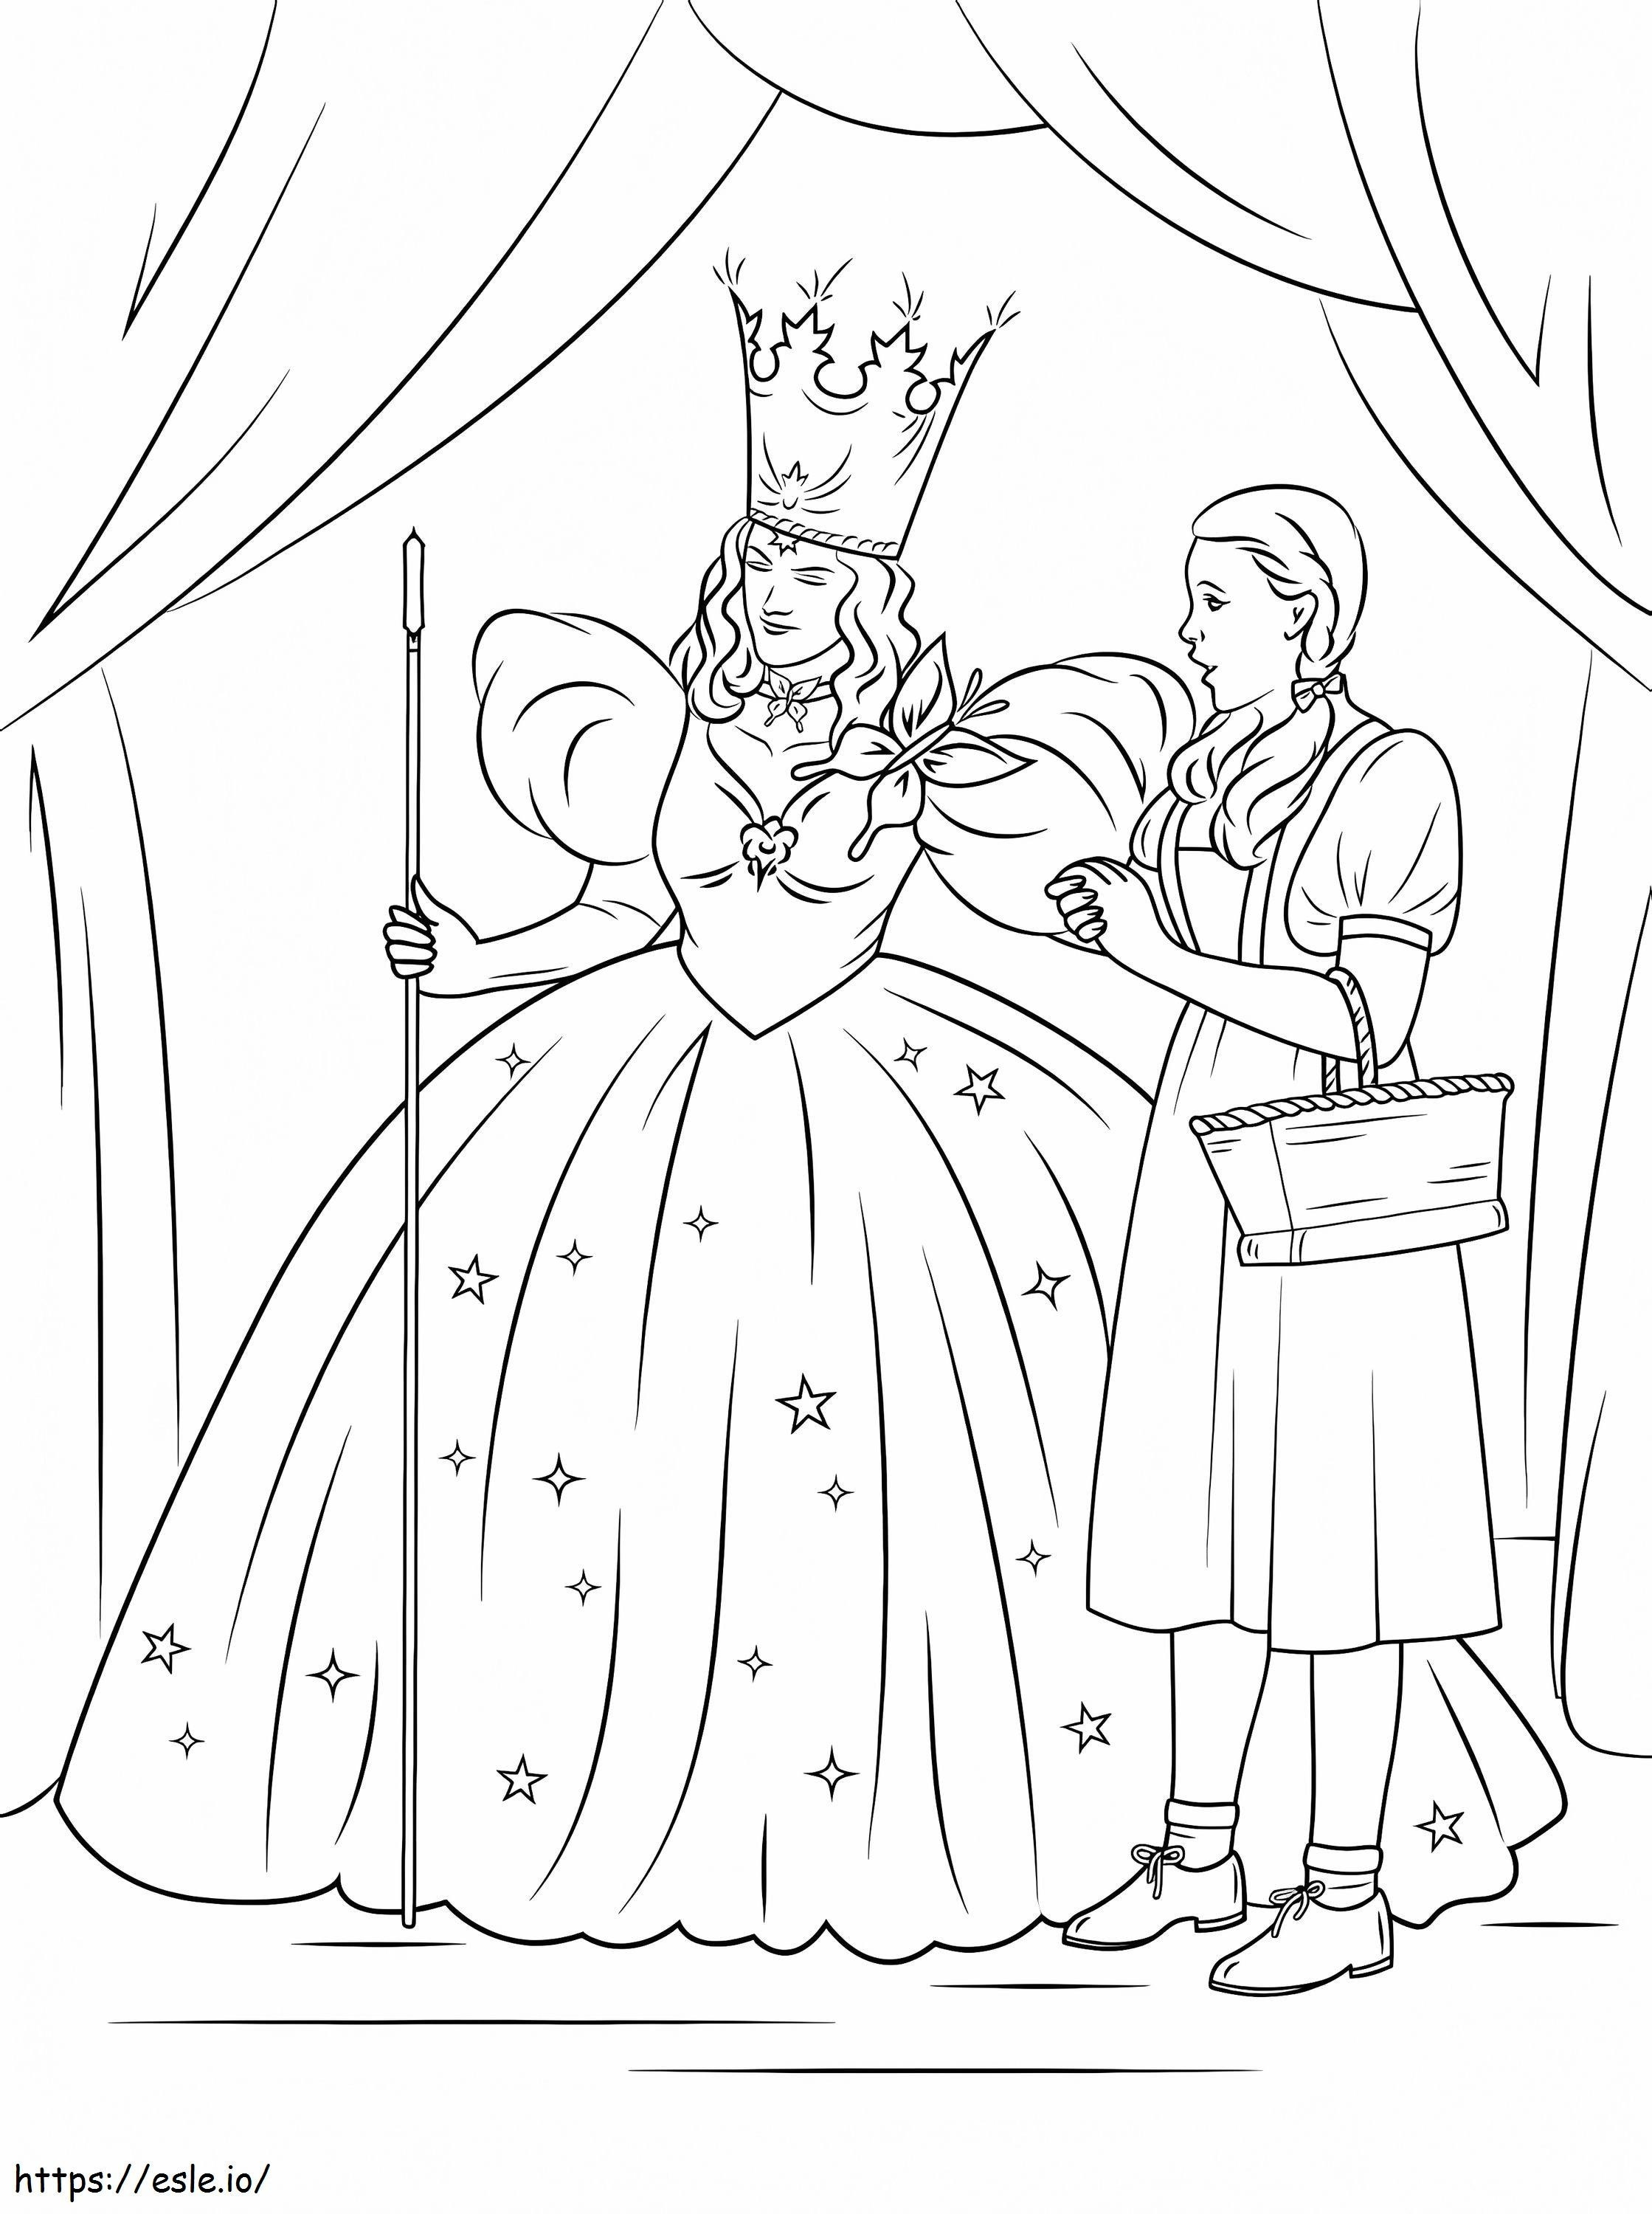 Dorothy With Glinda The Good Witch Of The North coloring page